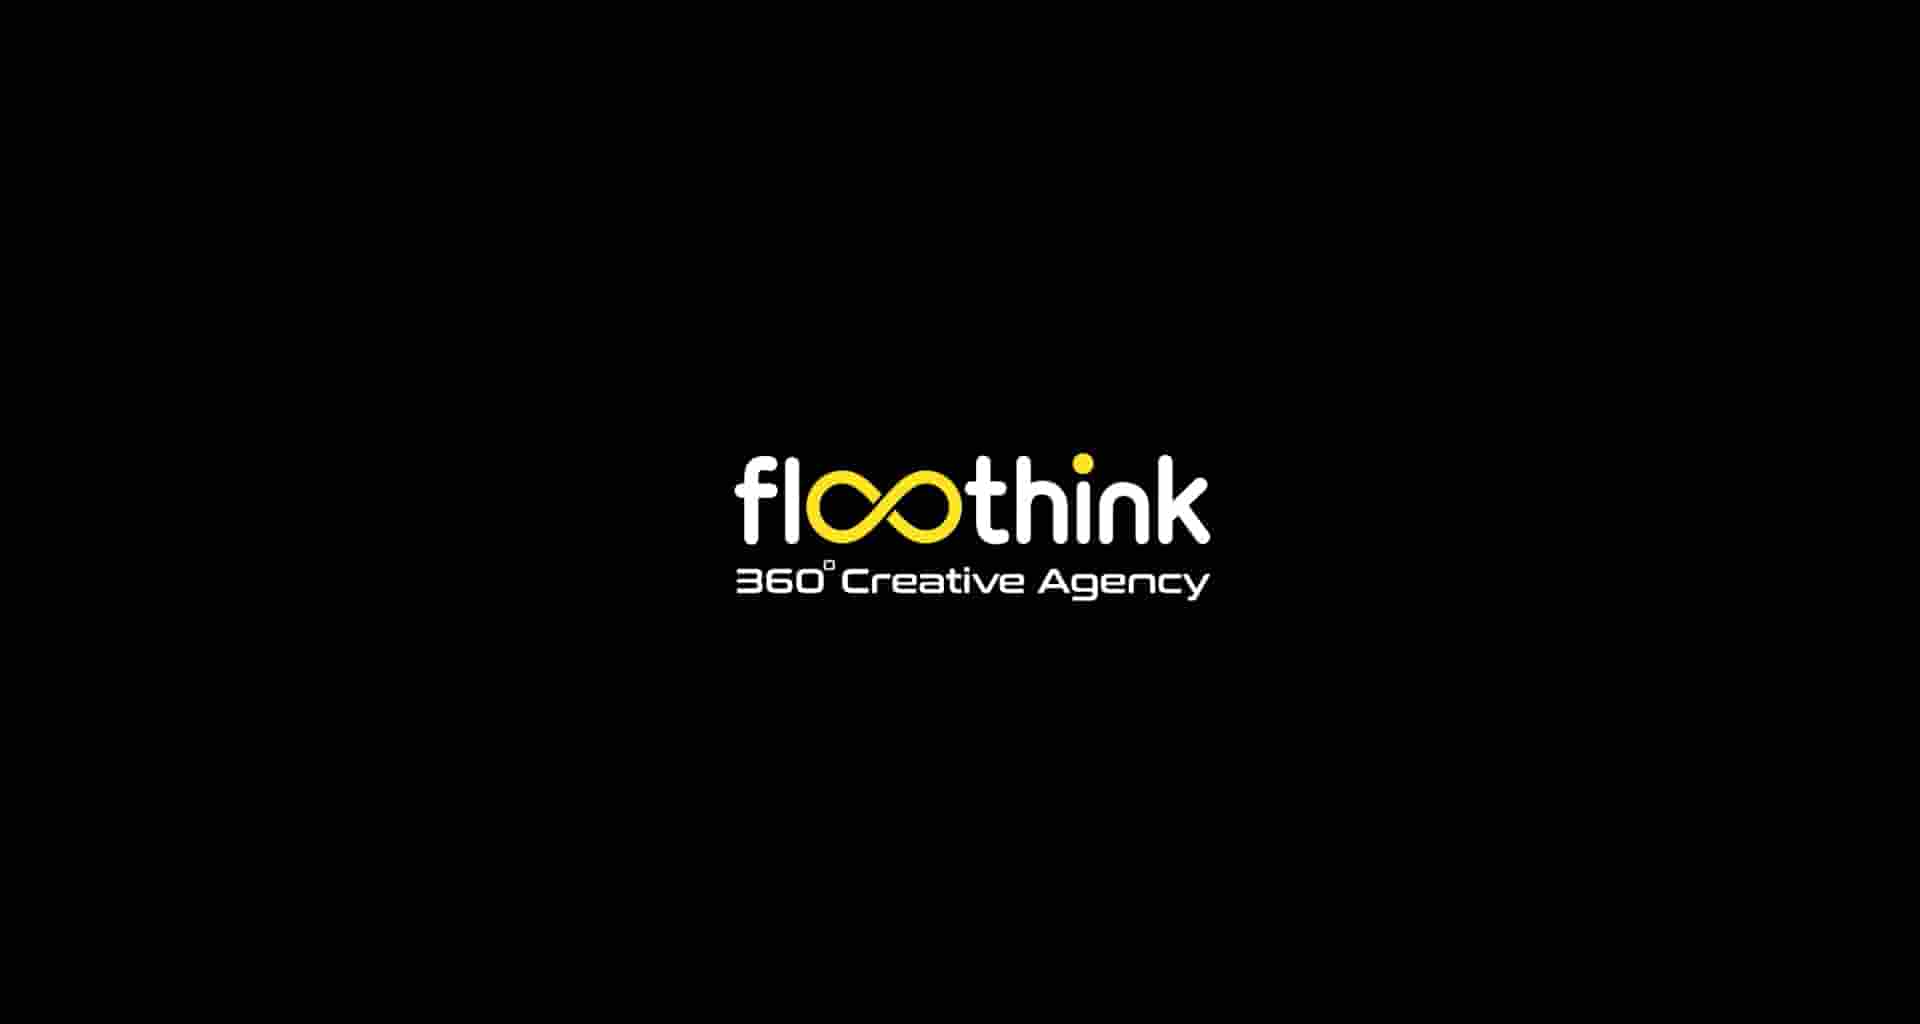 About Floothink